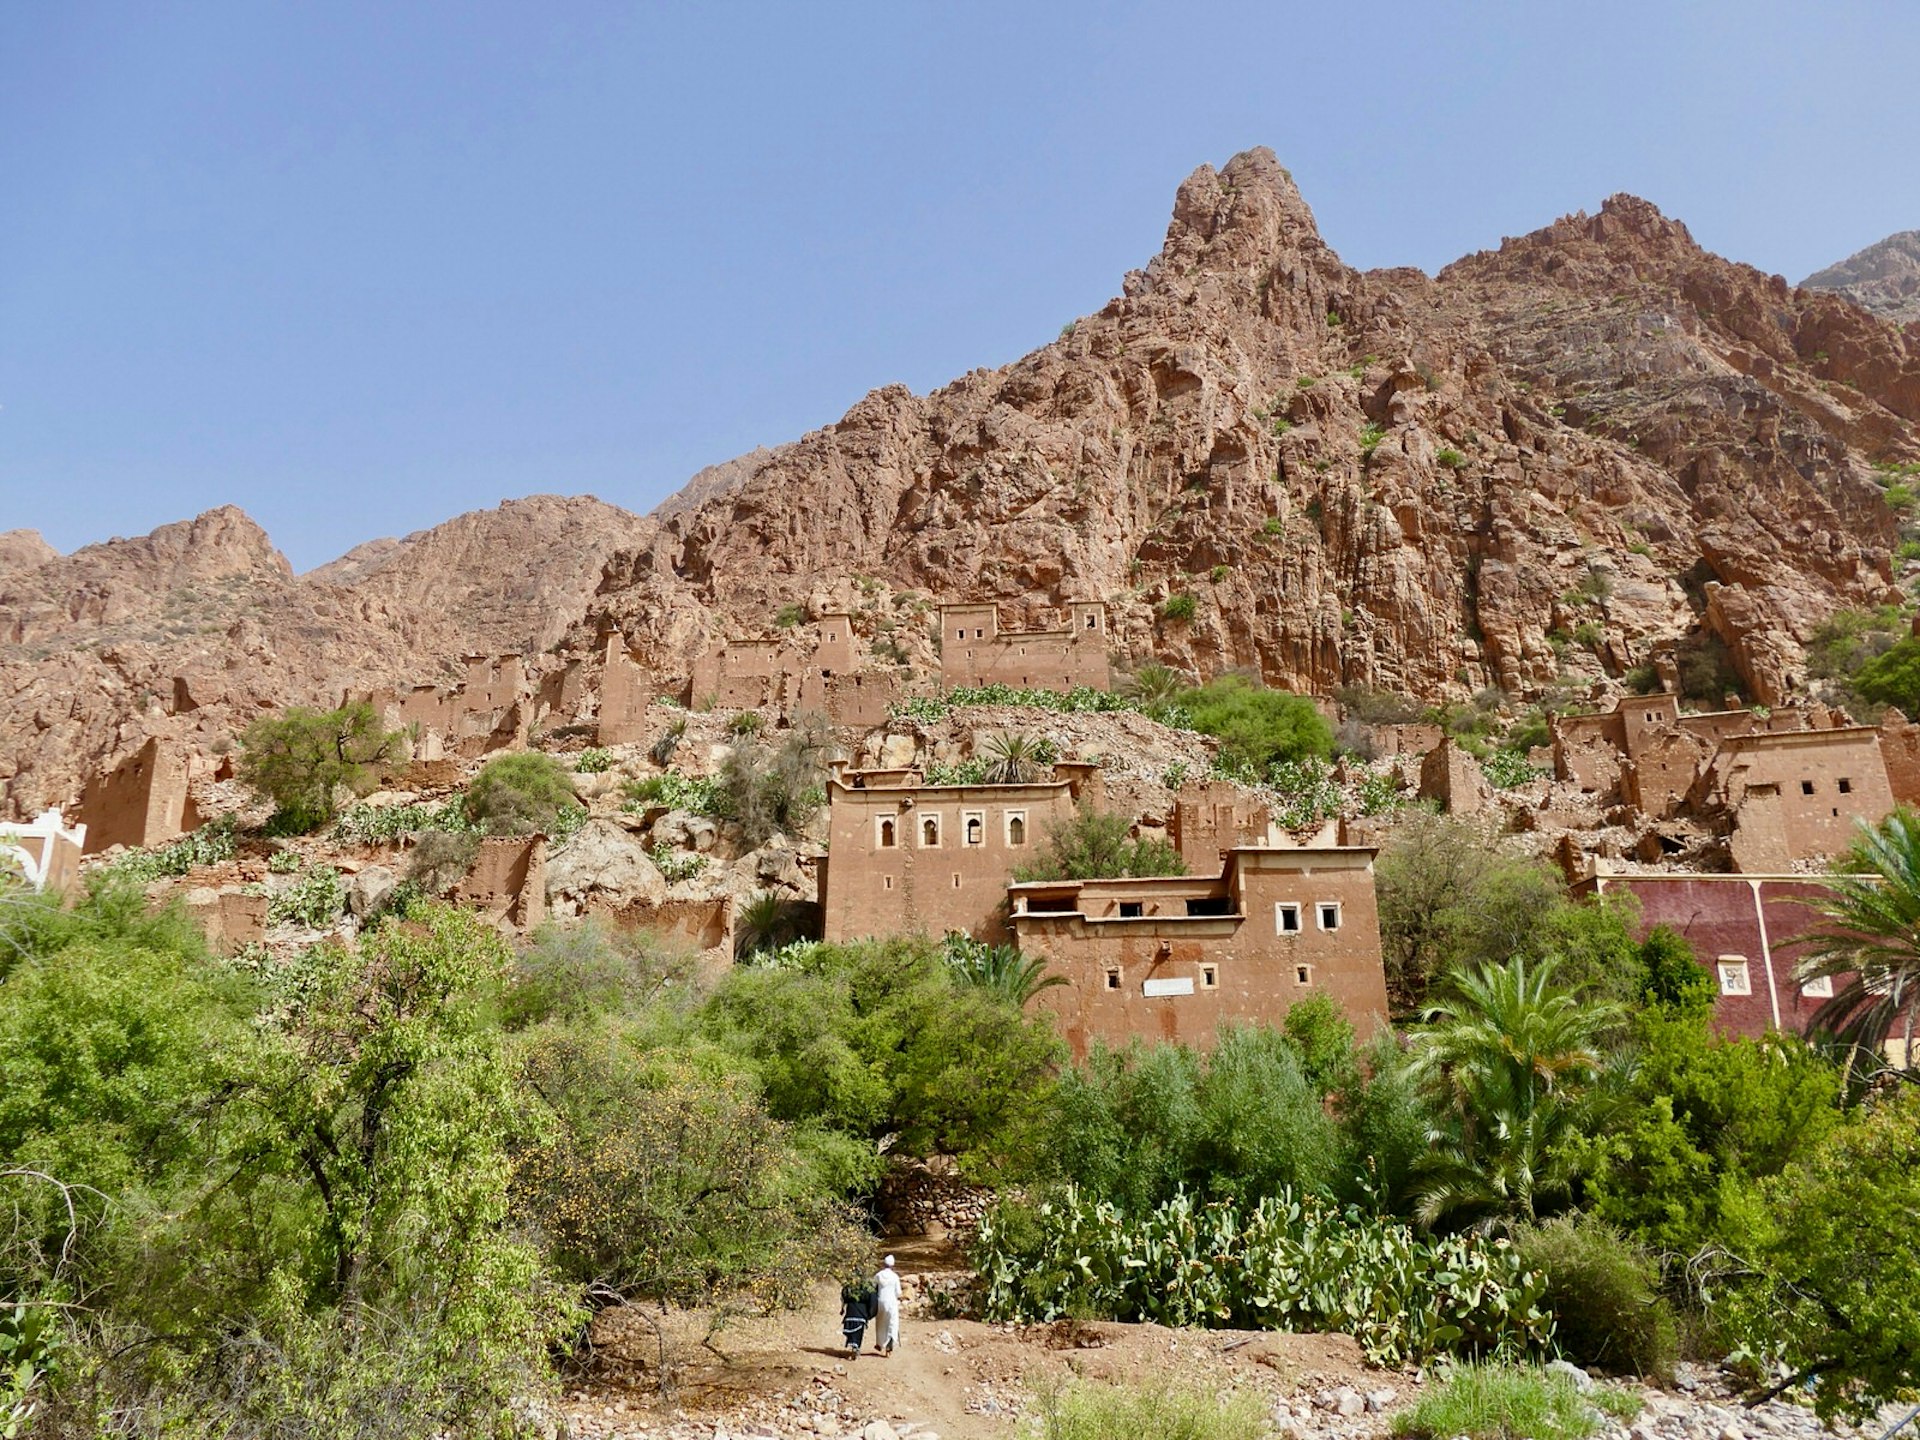 Rugged mountains behind the village of Tafraoute, Anti Atlas, Morocco